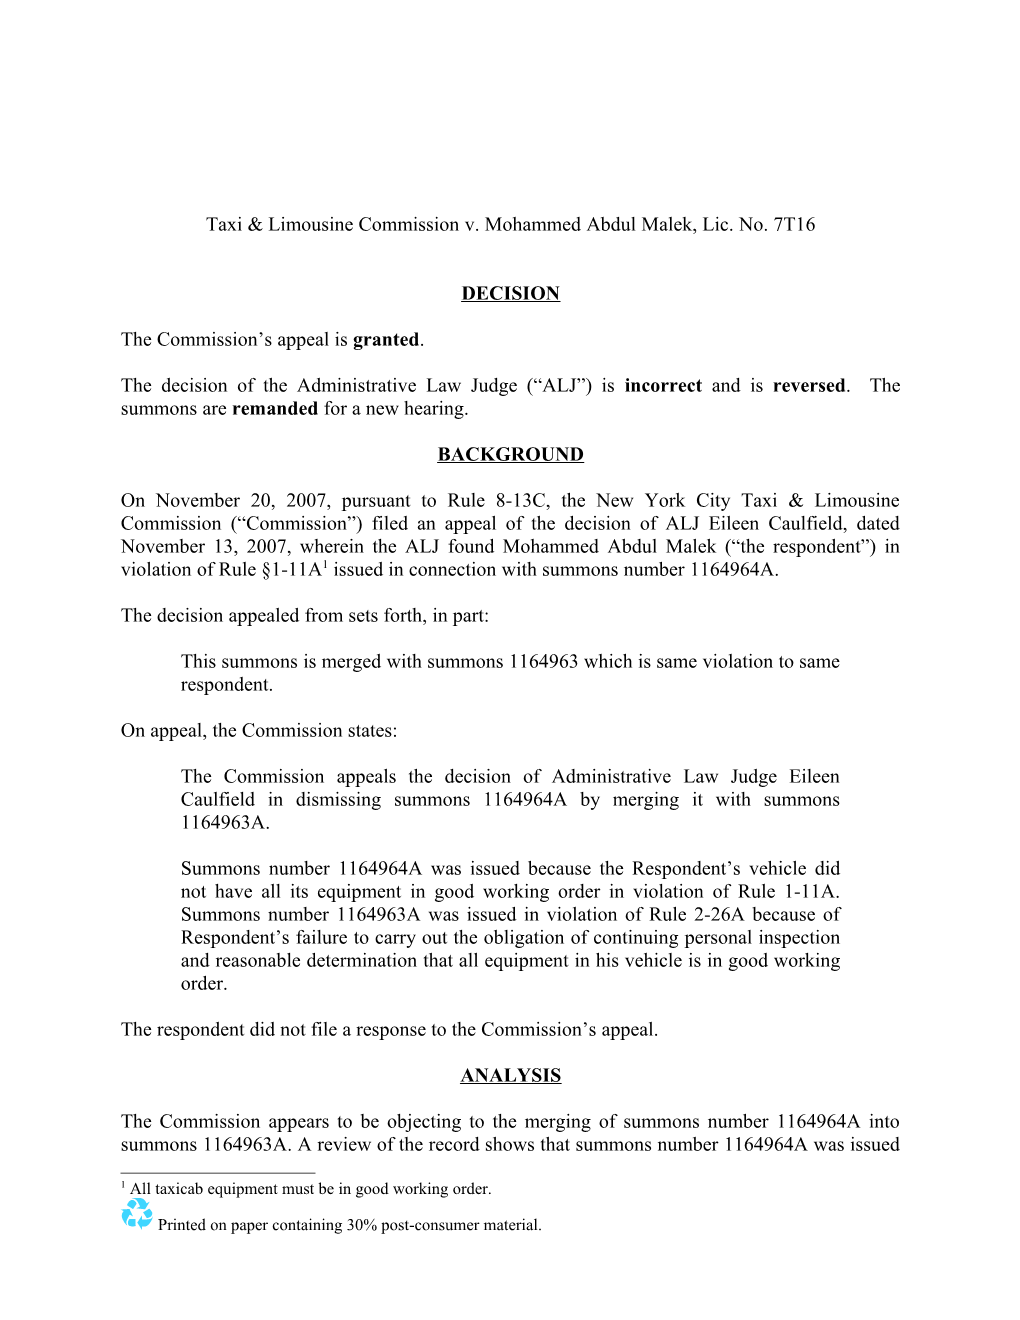 Taxi & Limousine Commission V. Mohammed Abdul Malek, Lic. No. 7T16